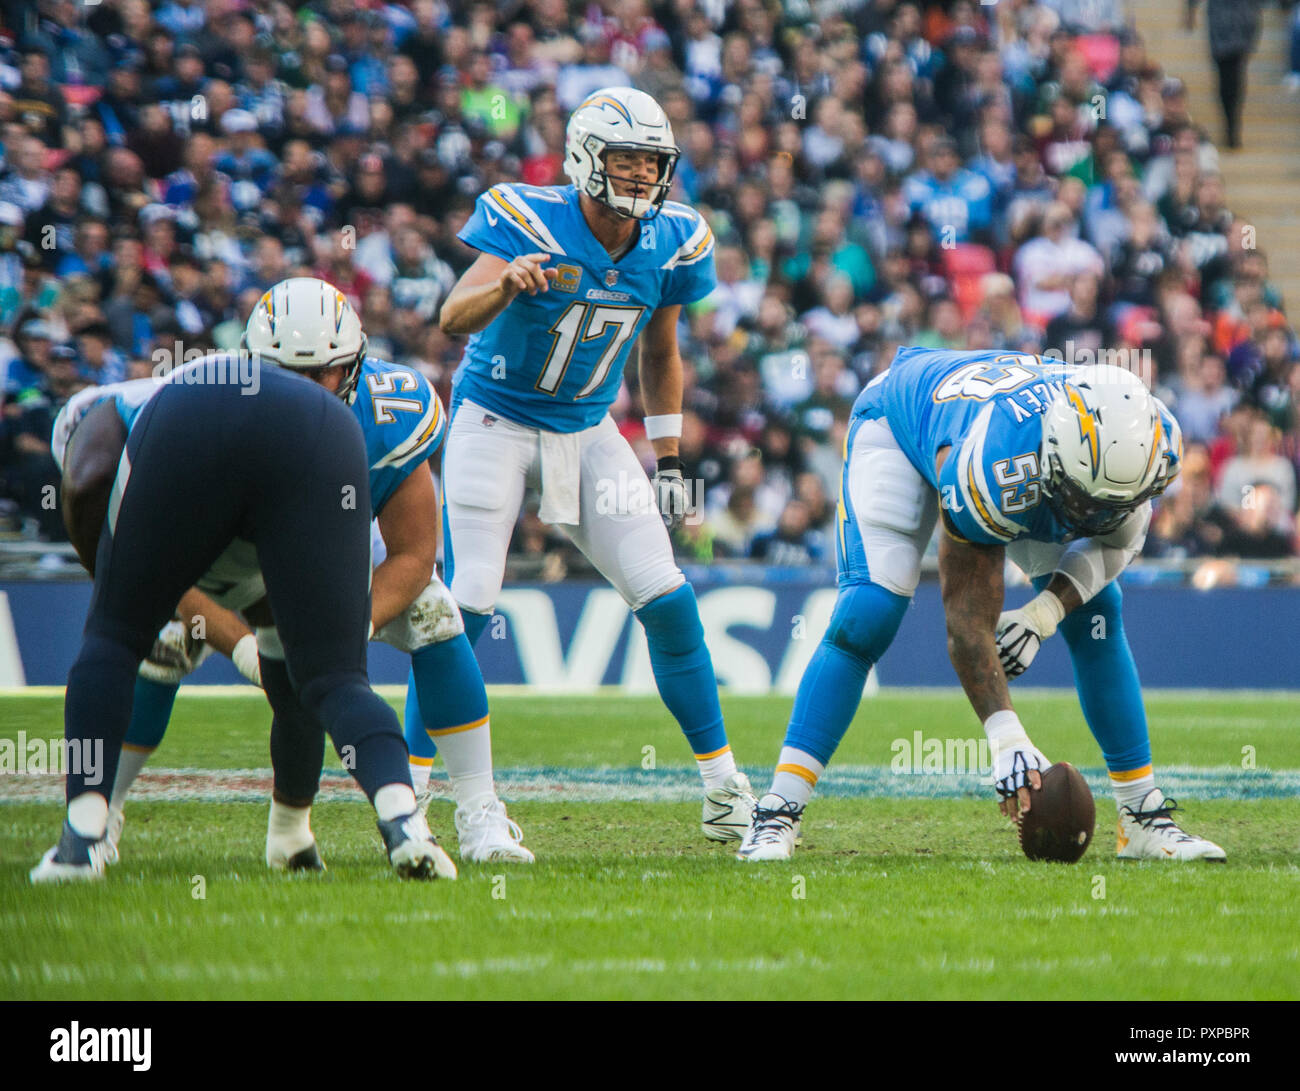 21st October 2018 LONDON, ENG - NFL: OCT 21 International Series - Titans at Chargers Los Angeles Chargers Quarterback Philip Rivers (17) and Los Angeles Chargers Center Mike Pouncey (53) - Credit Glamourstock Stock Photo